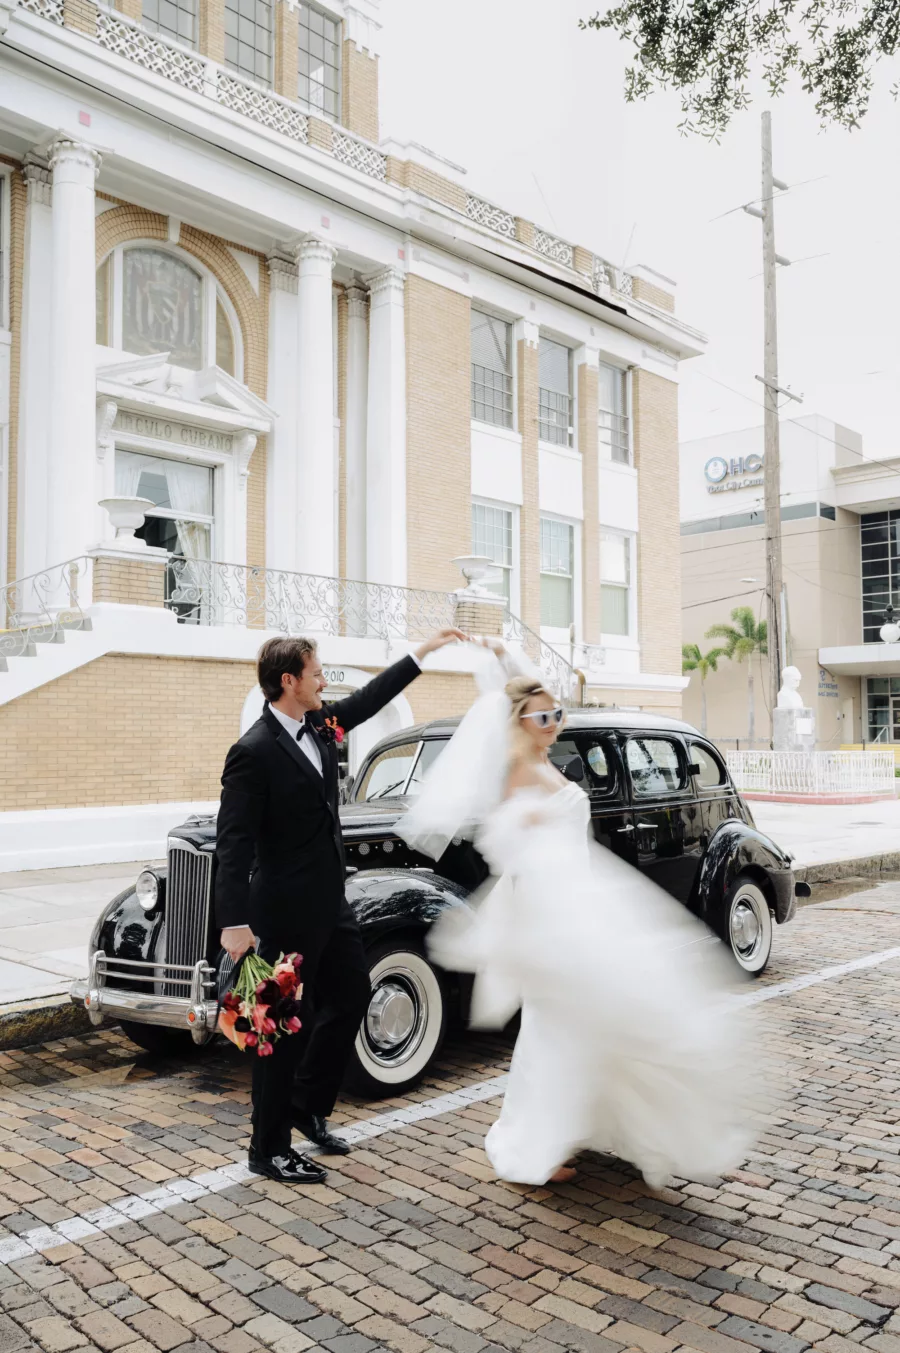 Bride and Groom Dancing in the Road with Classic Wedding Day Getaway Car Inspiration | Tampa Bay Car Rental Classically Ever After | Photographer McNeile Photography | Planner EventFull Weddings | Content Creator Behind the Vows